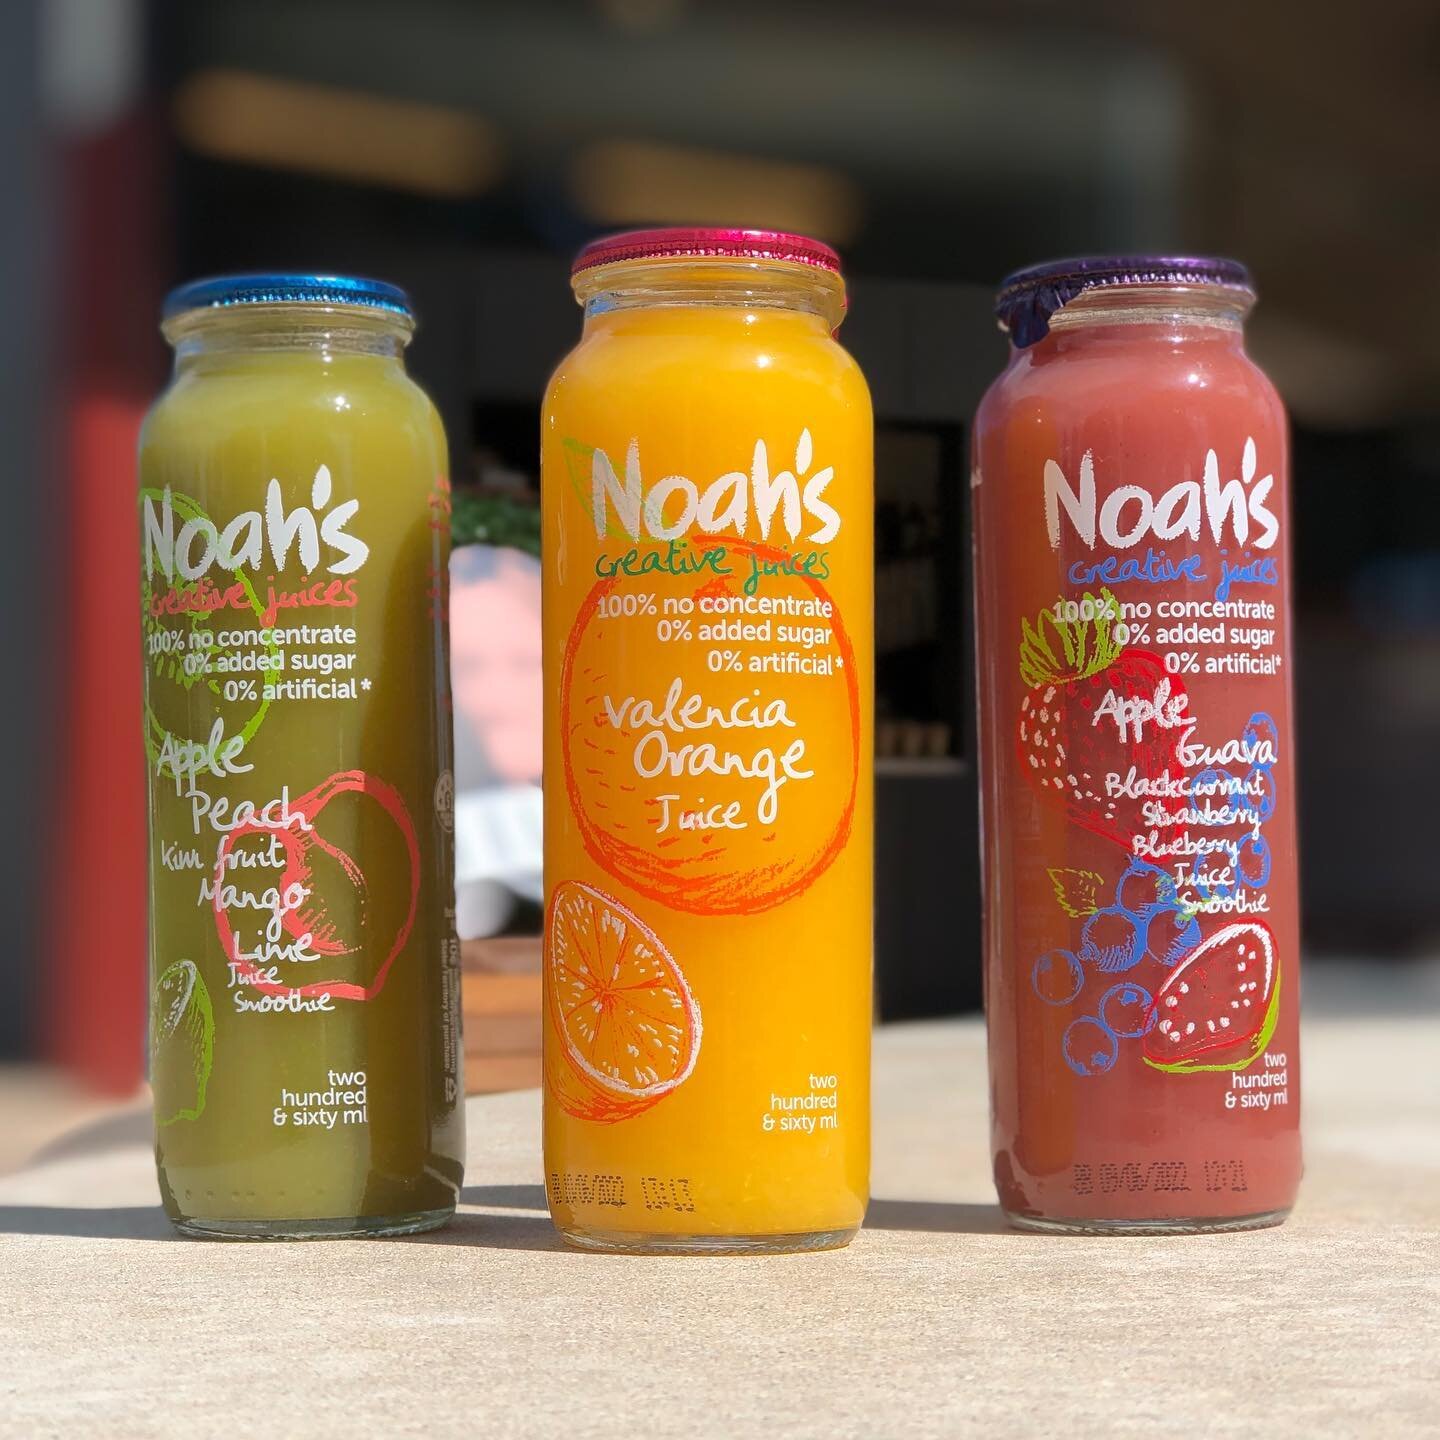 Looking for concentrate and artificial free juice with no added sugar?

We Noah guy. 🍏🍊🍓